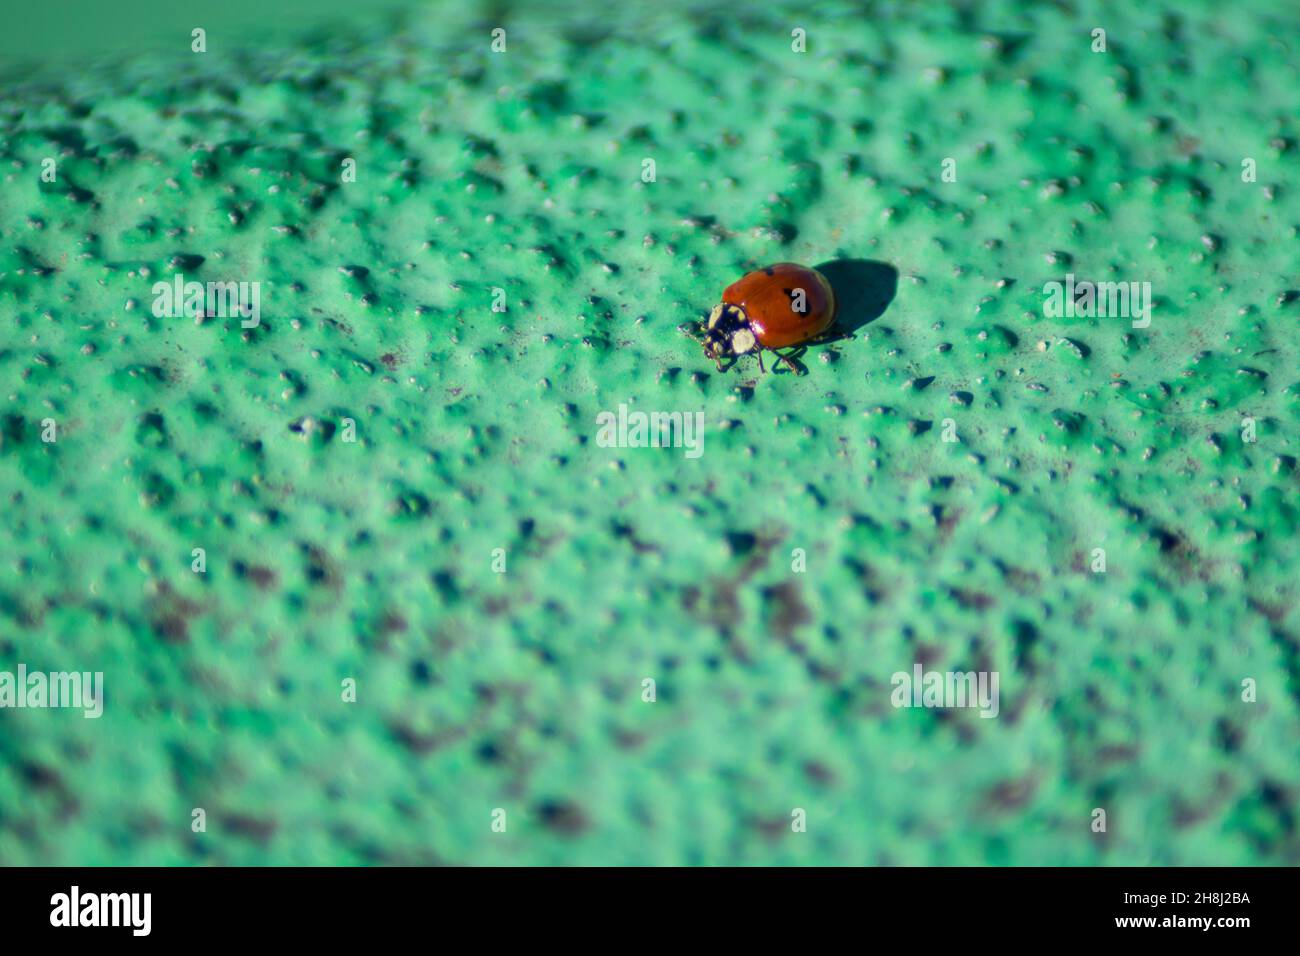 Red and black Ladybug walking alone on a green floor creating a color contrast Stock Photo